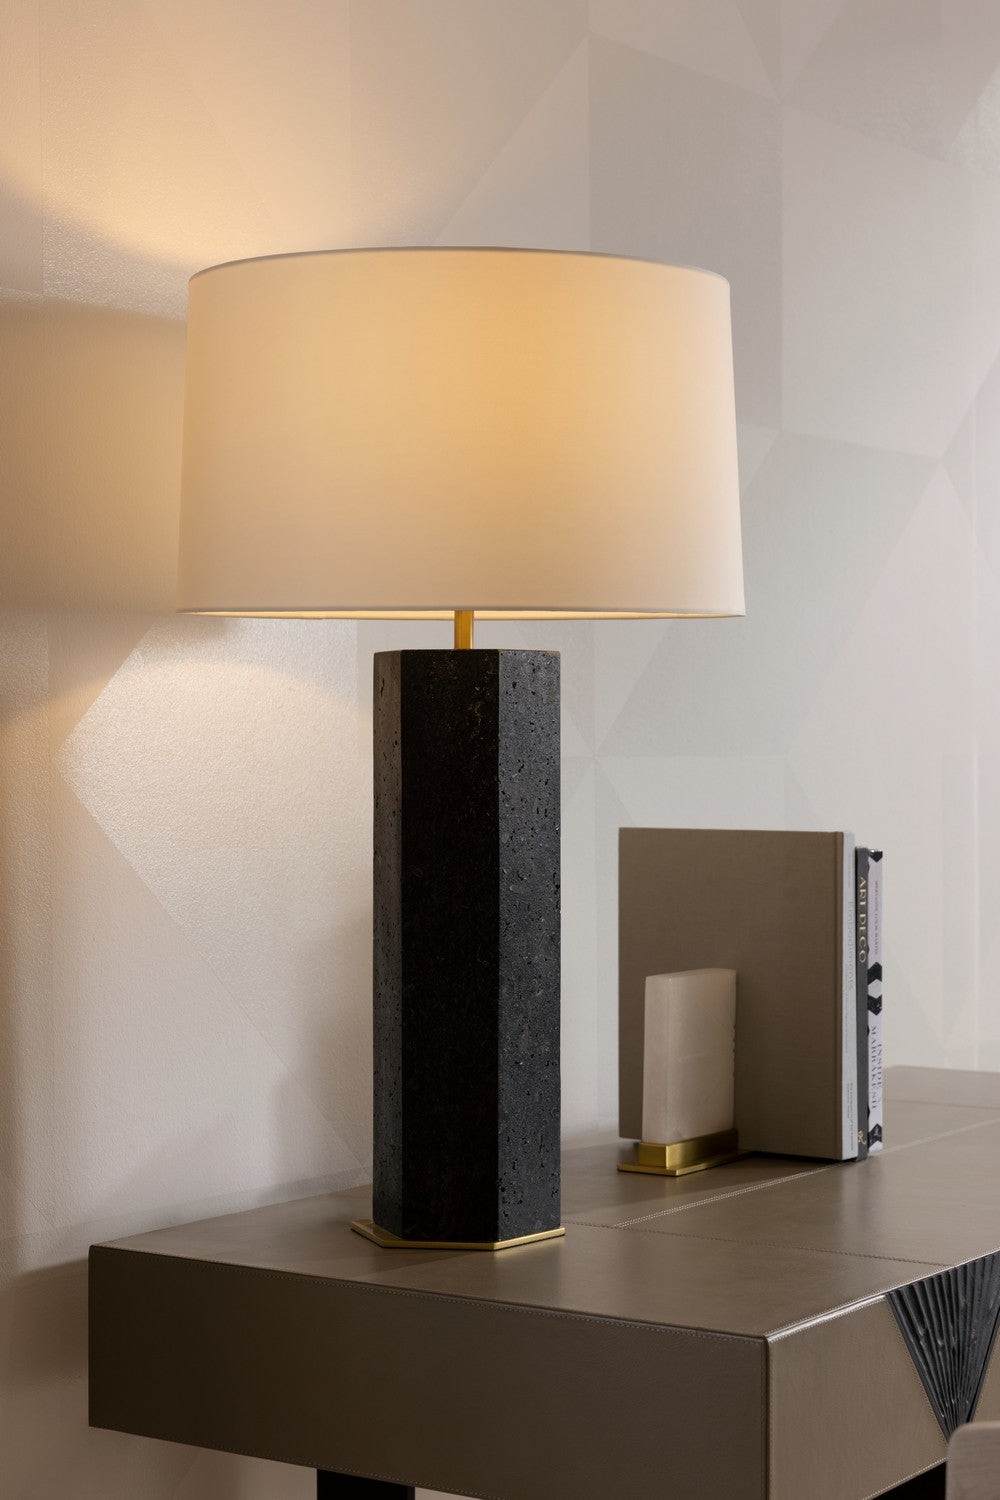 One Light Table Lamp from the Vesanto collection in Charcoal finish